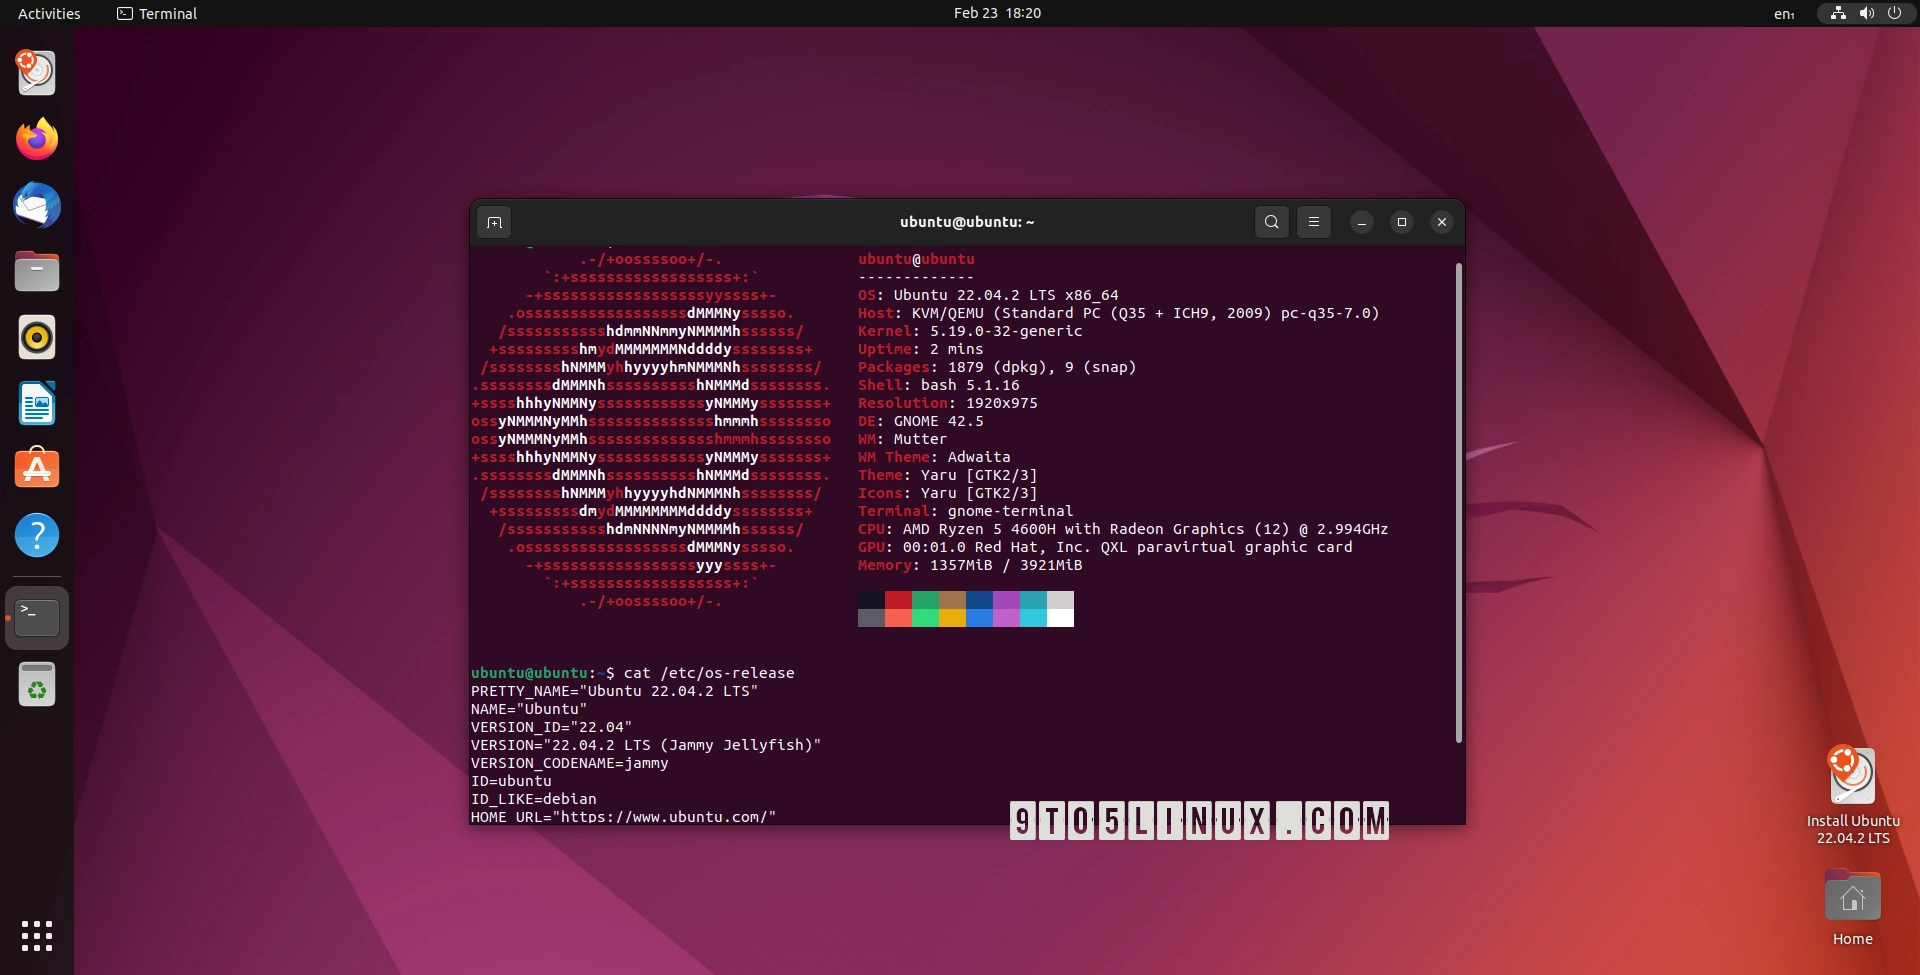 Ubuntu 22.04.2 LTS Released with Linux Kernel 5.19, Updated Components